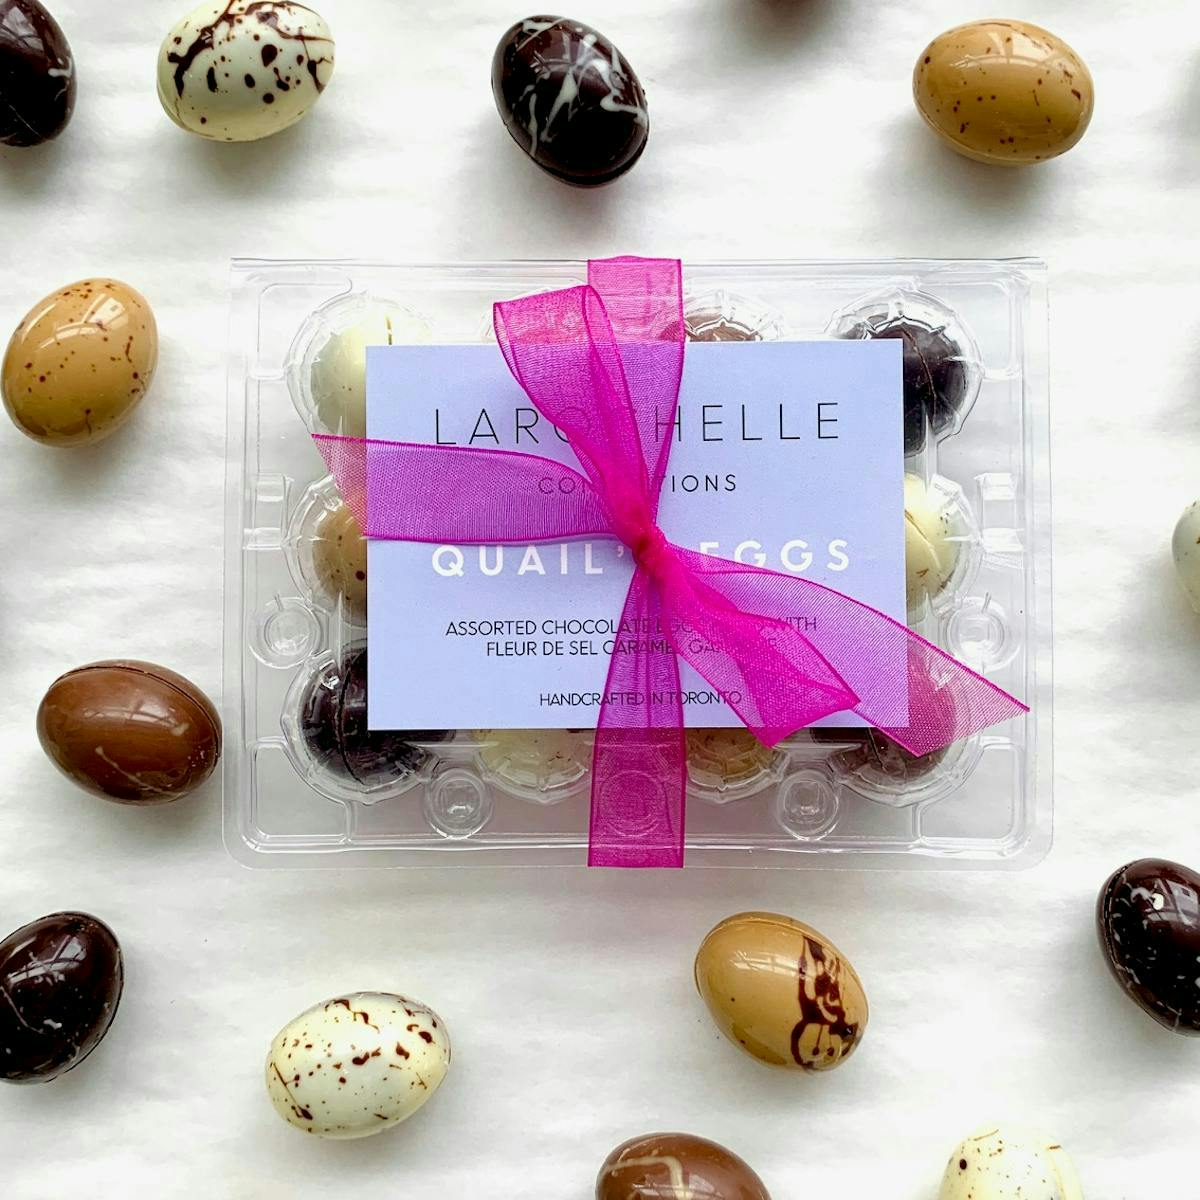 Chocolate quail eggs from La Rochelle in various colour with a box tied with a pink bow.